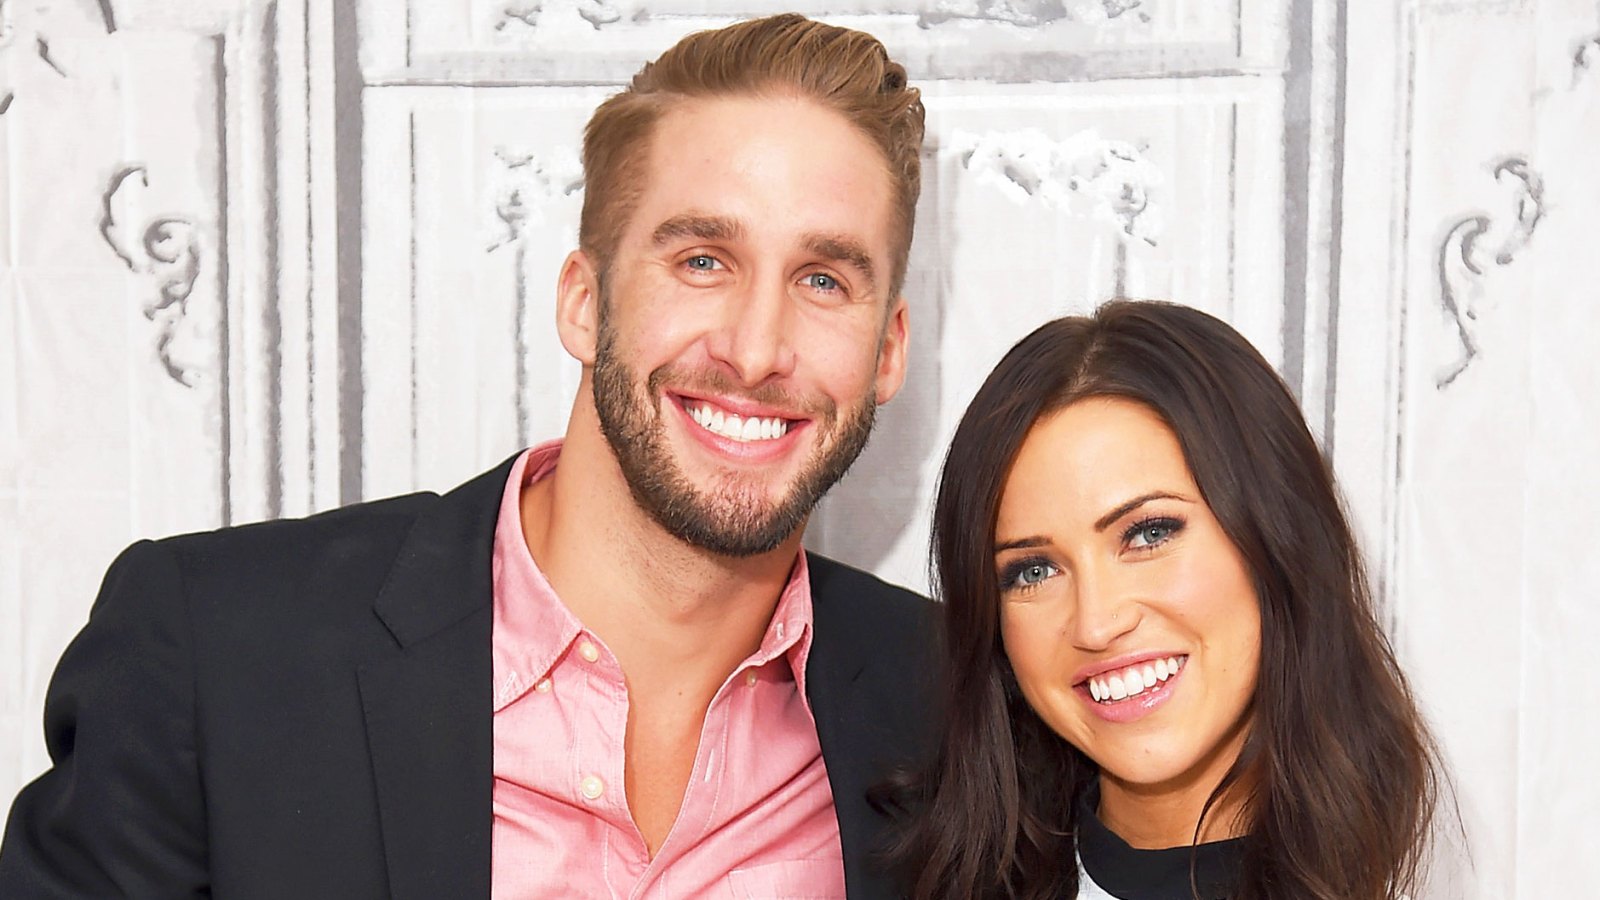 Shawn Booth and Kaitlyn Bristowe attend the AOL BUILD Speaker Series presentation of "After the Final Rose" on July 29, 2015 in New York City.